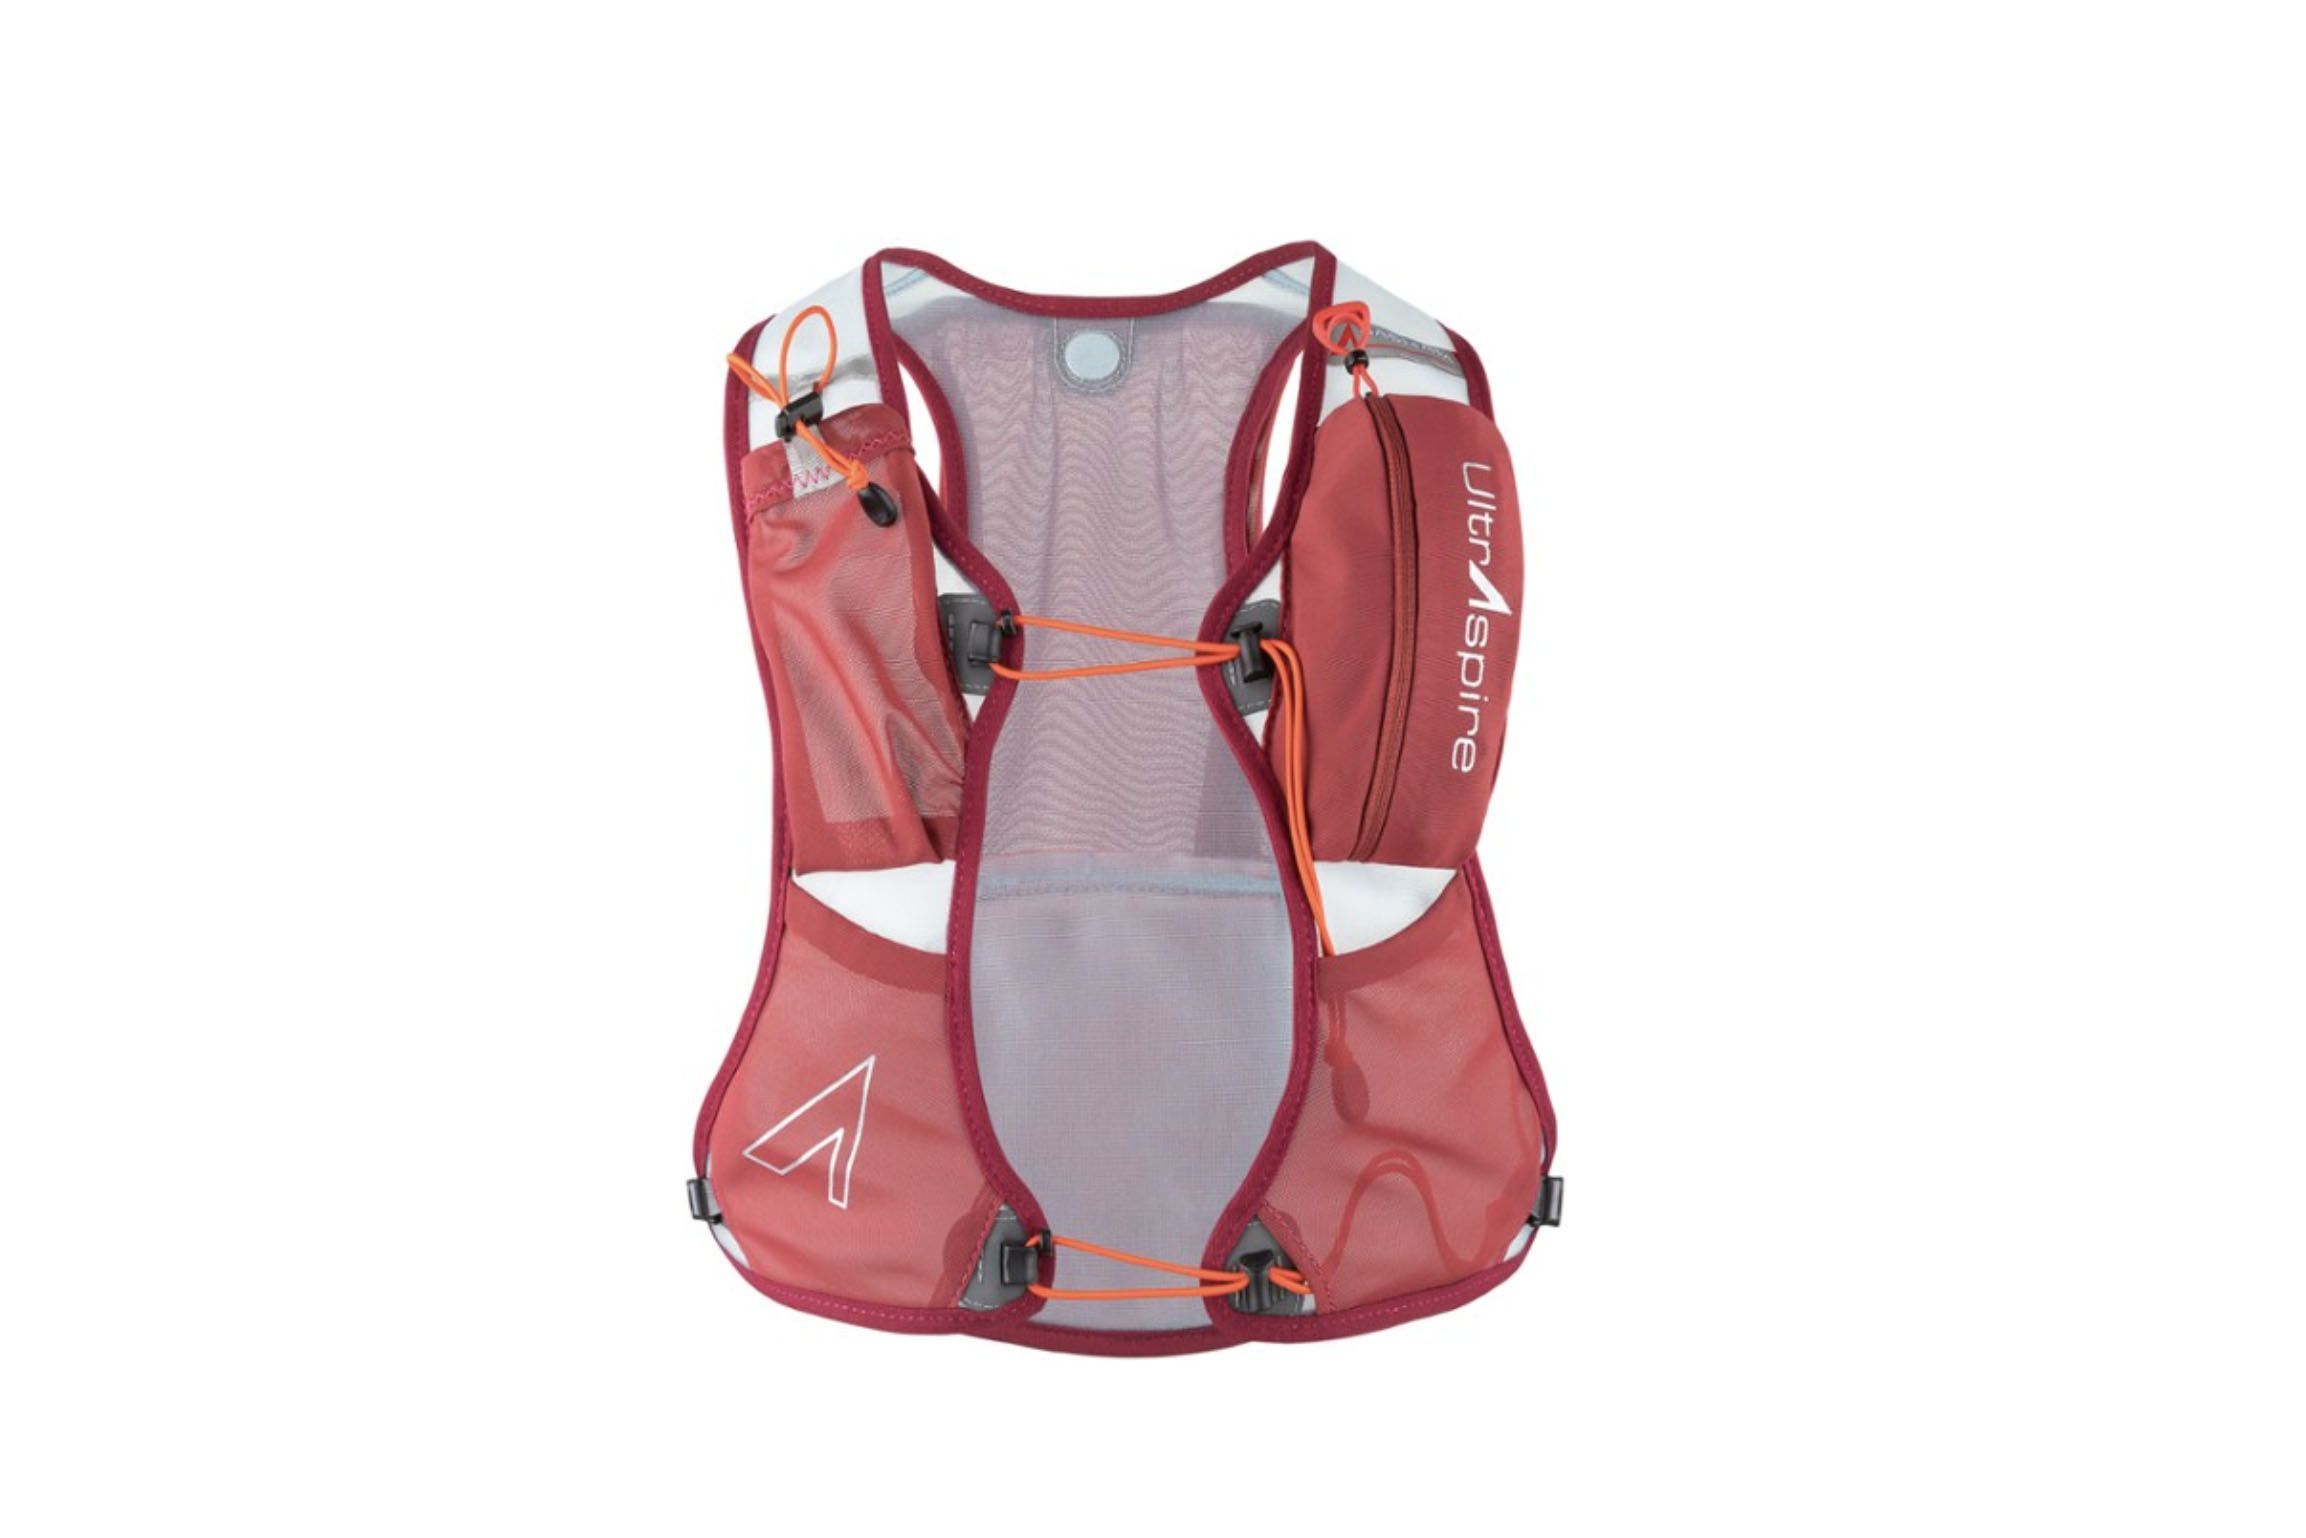 Running Hydration Water Backpack Outdoors Camping Hiking Marathon Vest Pack F2X3 